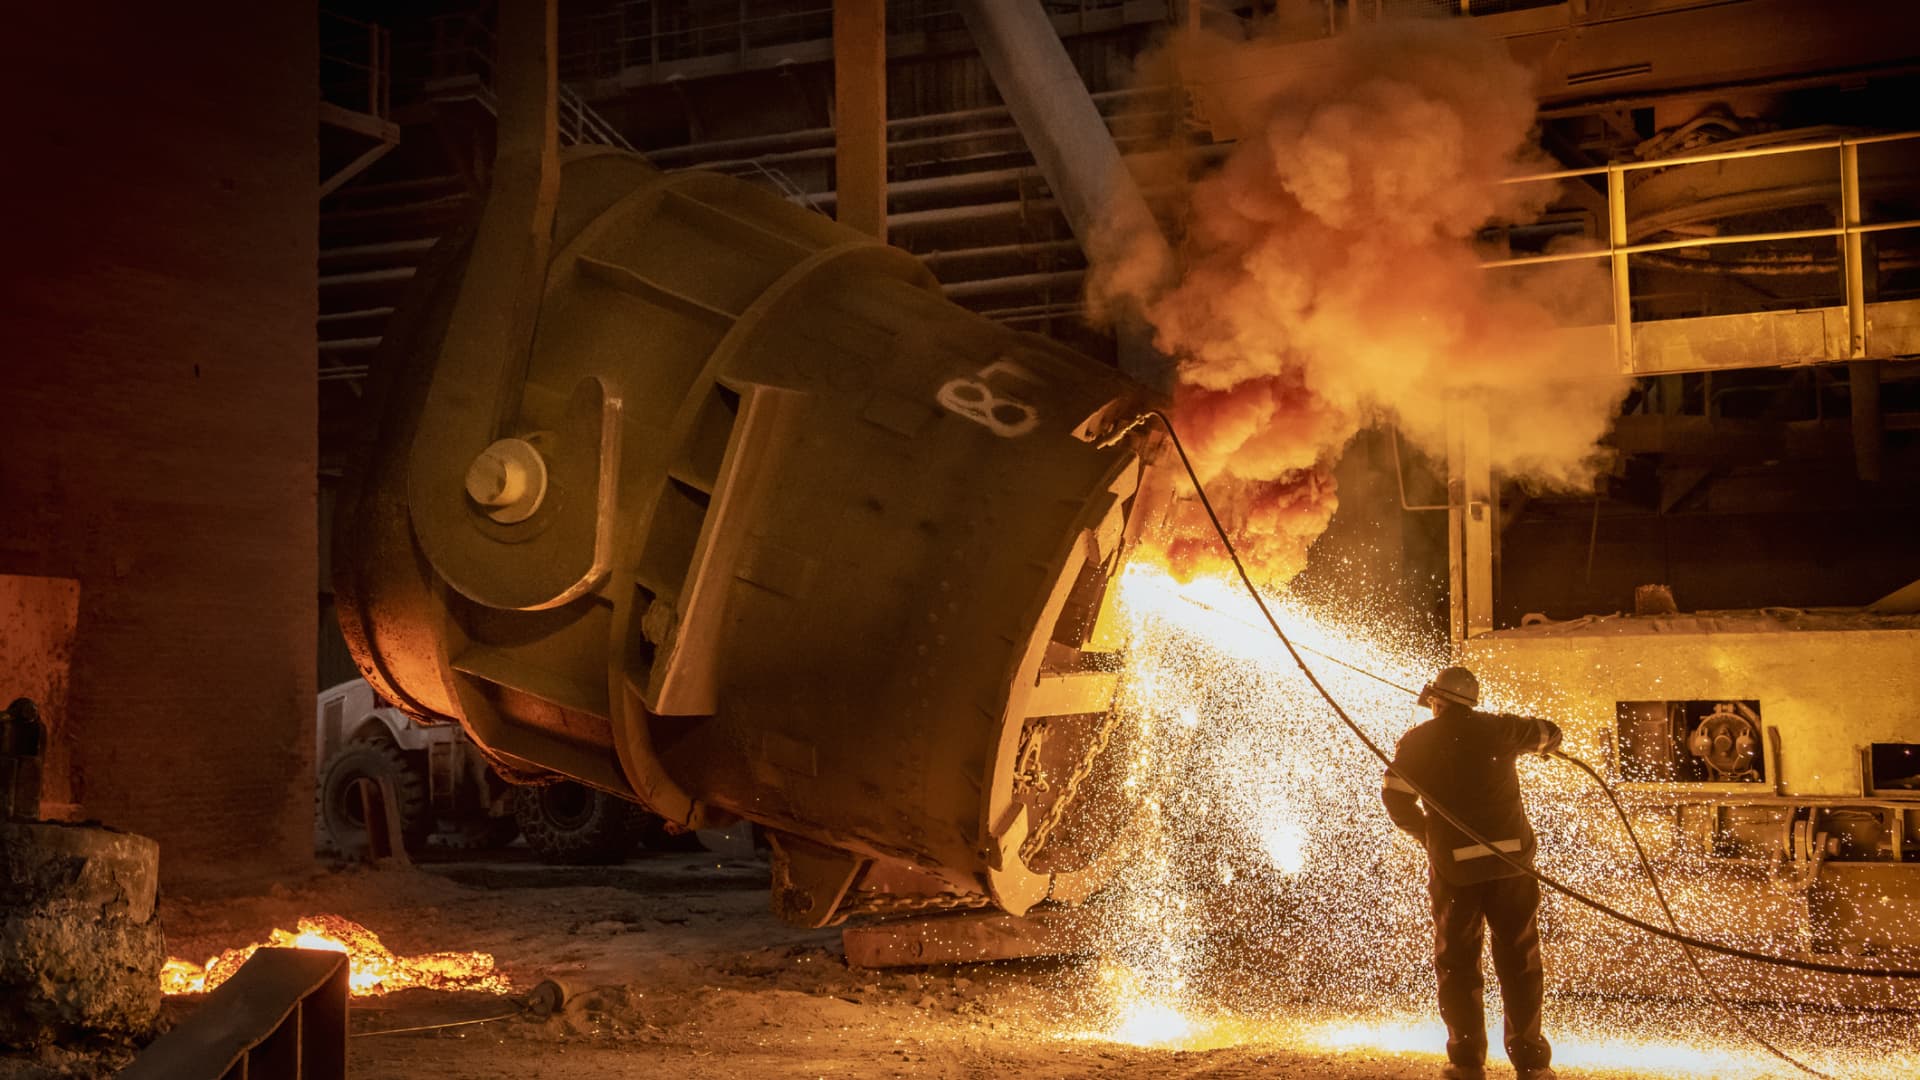 British Steel proposes to close coking ovens in move that could cut 260 UK jobs